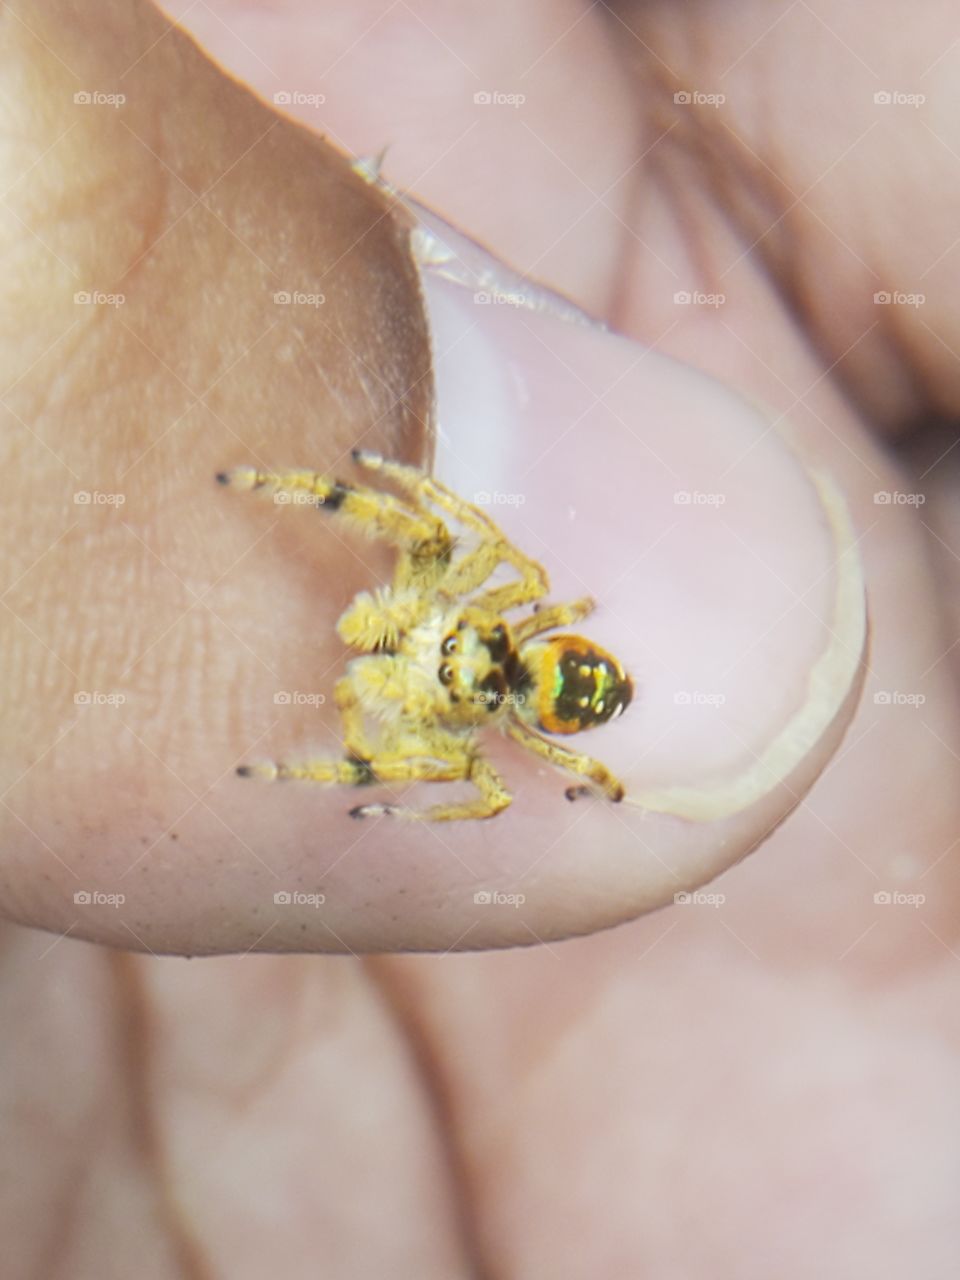 My pet jumping spider, Tophee, hanging out on my hand.